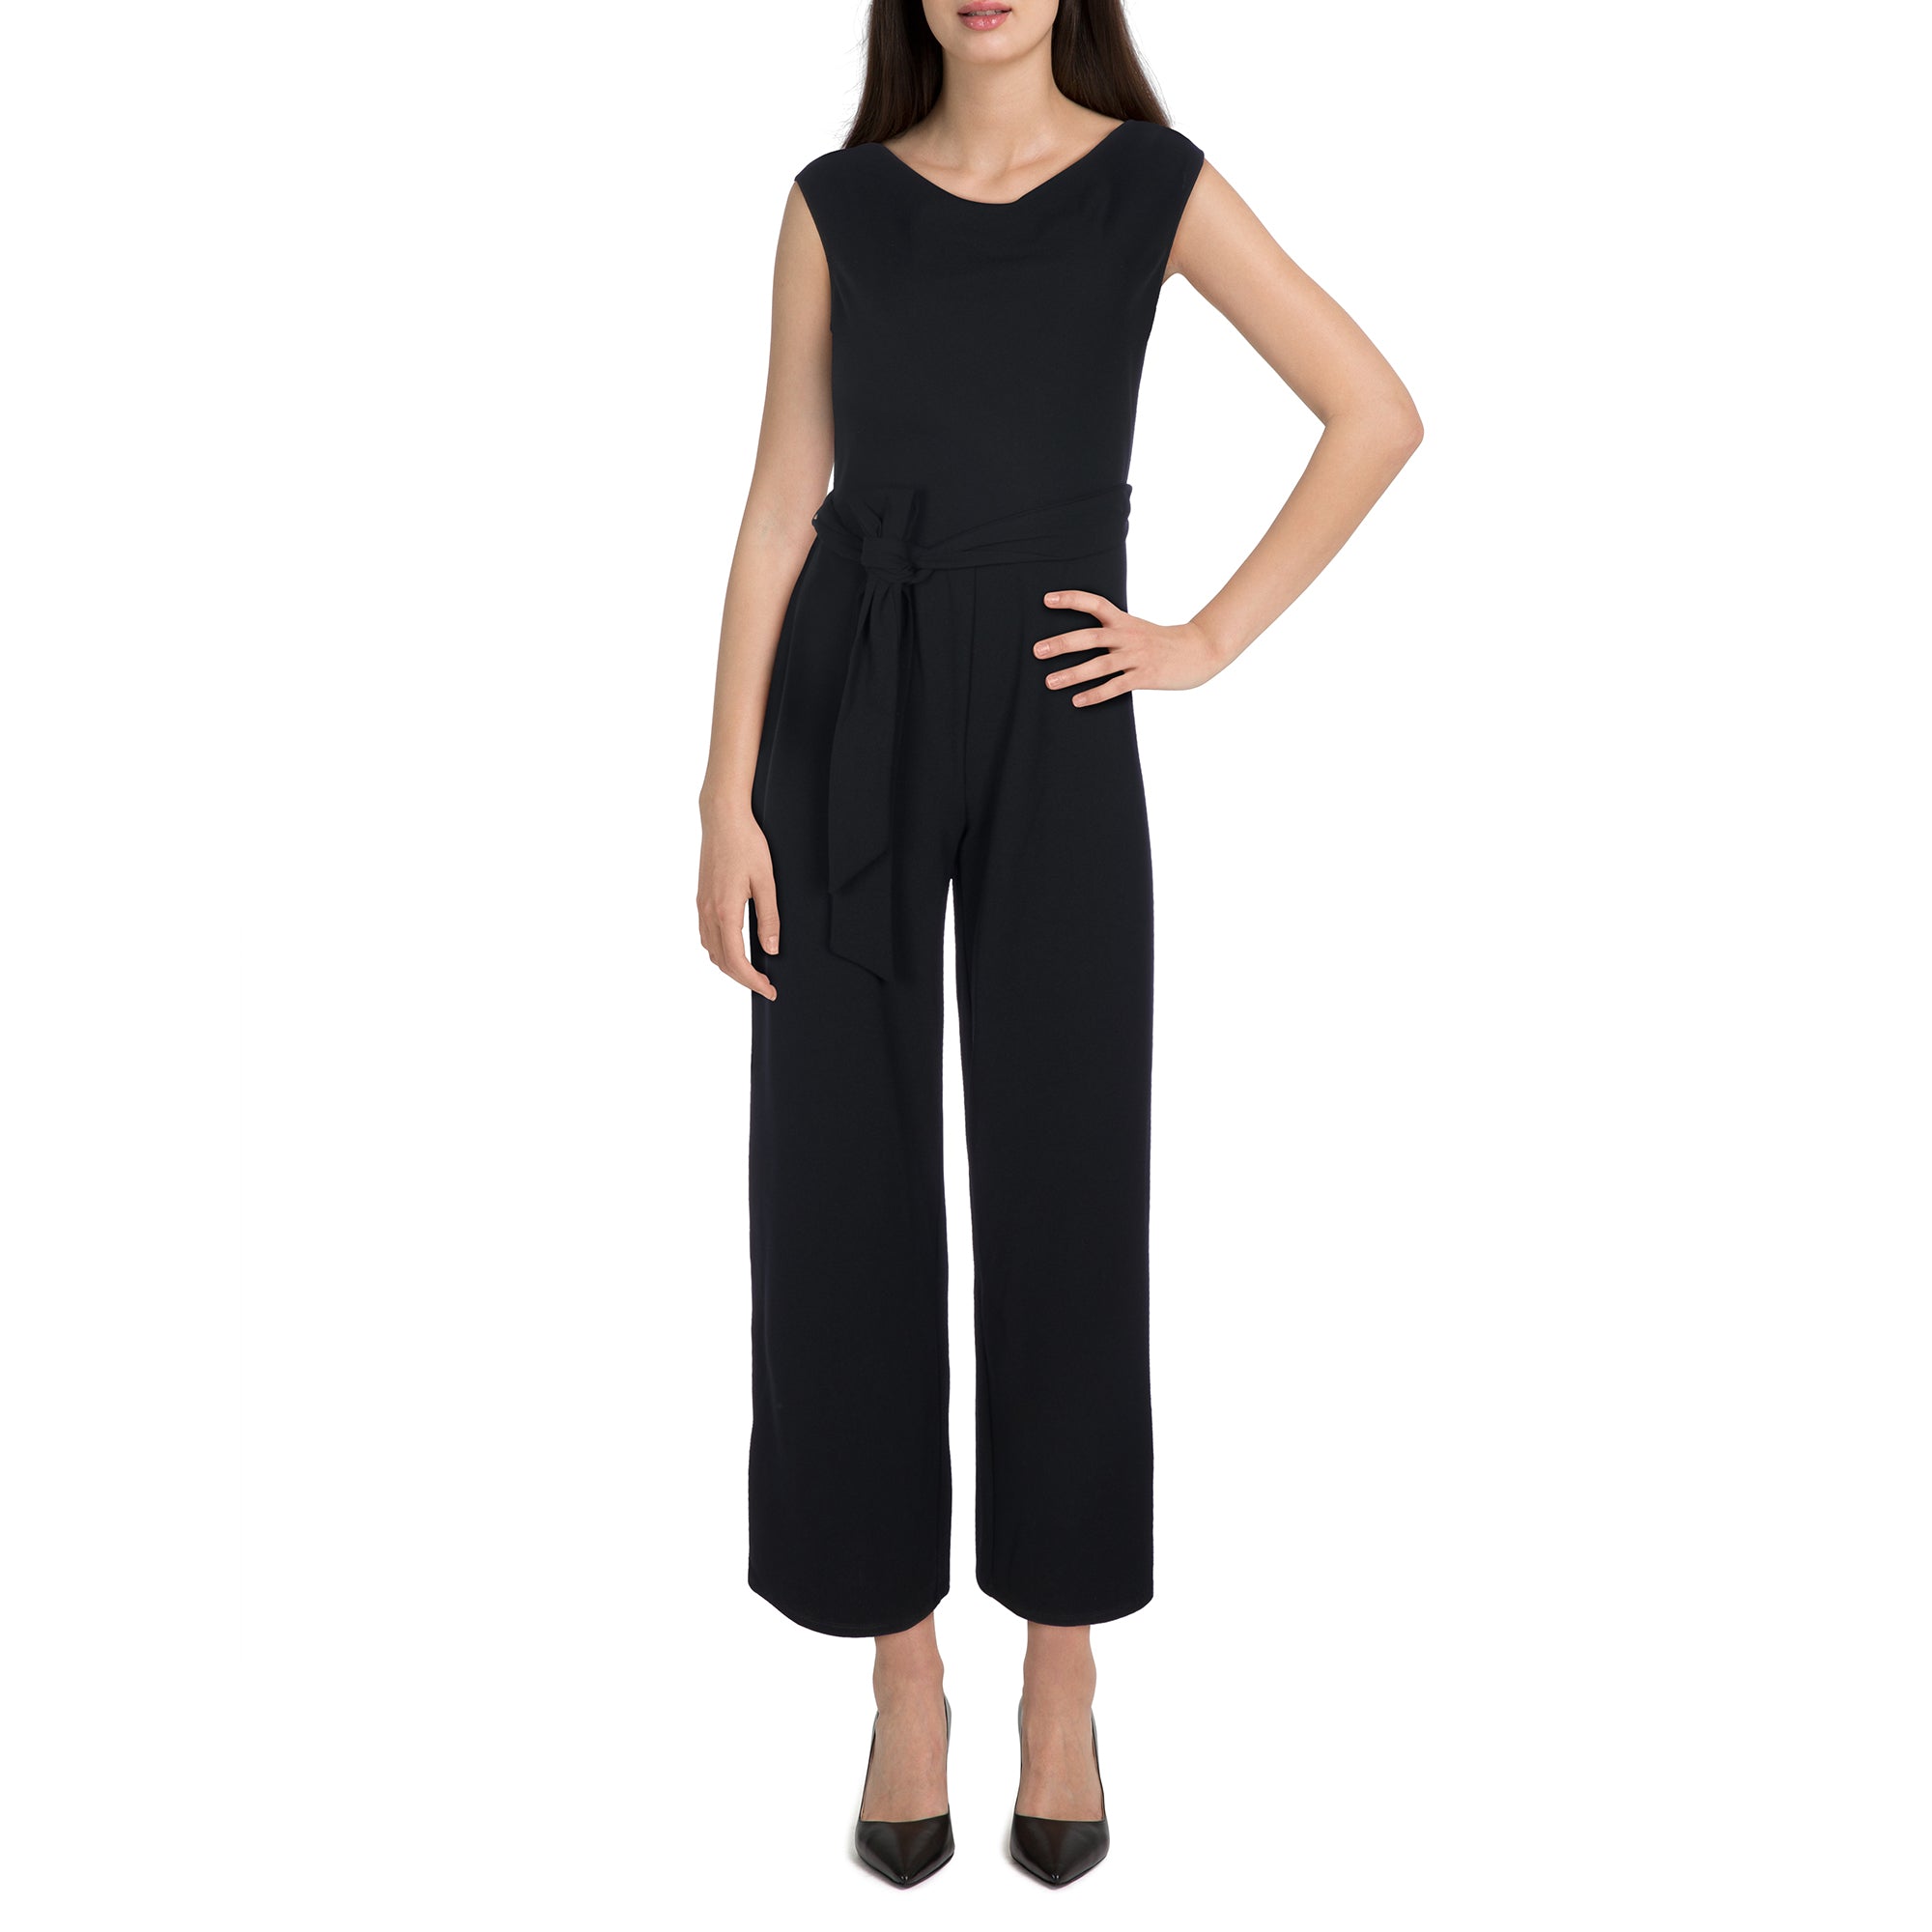 Lilgiuy Women's Jumpsuits Women's Overalls With Suspenders And